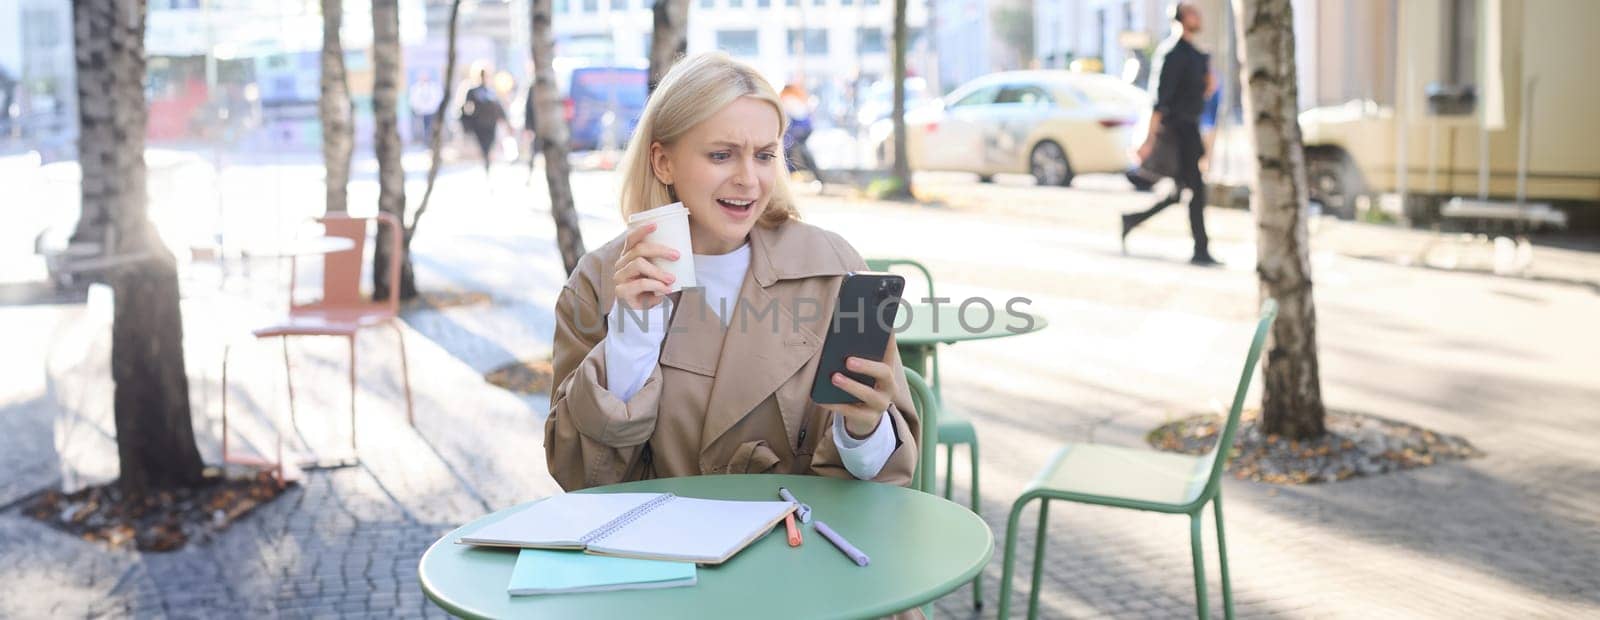 Portrait of cheerful, beautiful young woman taking selfie, chatting on video using smartphone, posing outdoors in coffee shop.